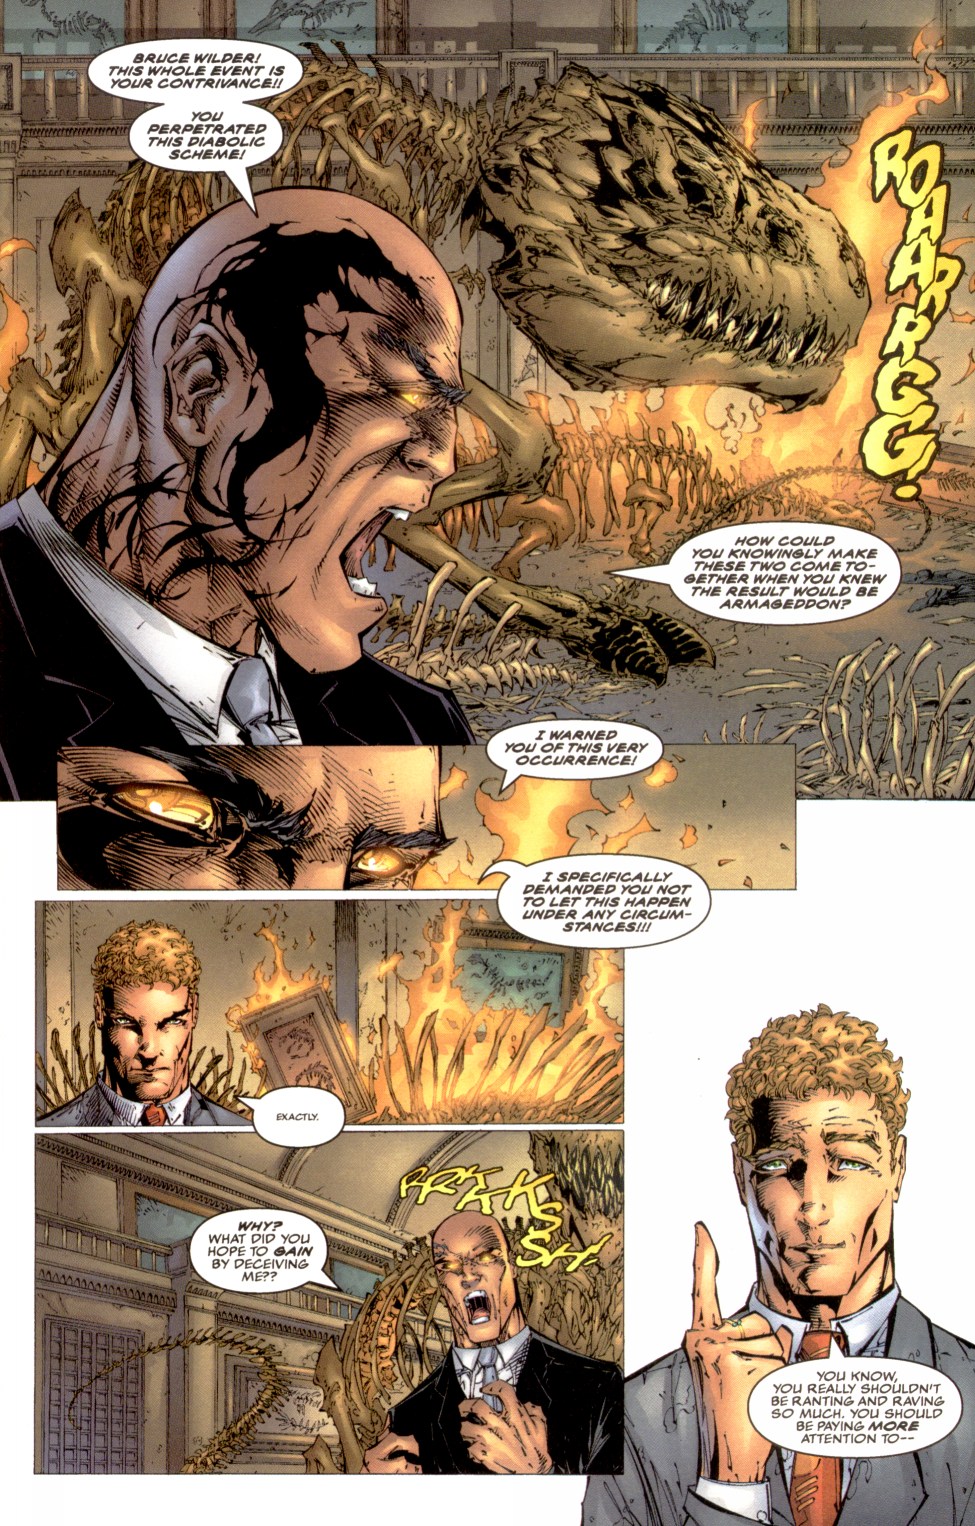 Witchblade #19 - Family Ties, Part 4 - Continued From The Darkness #10